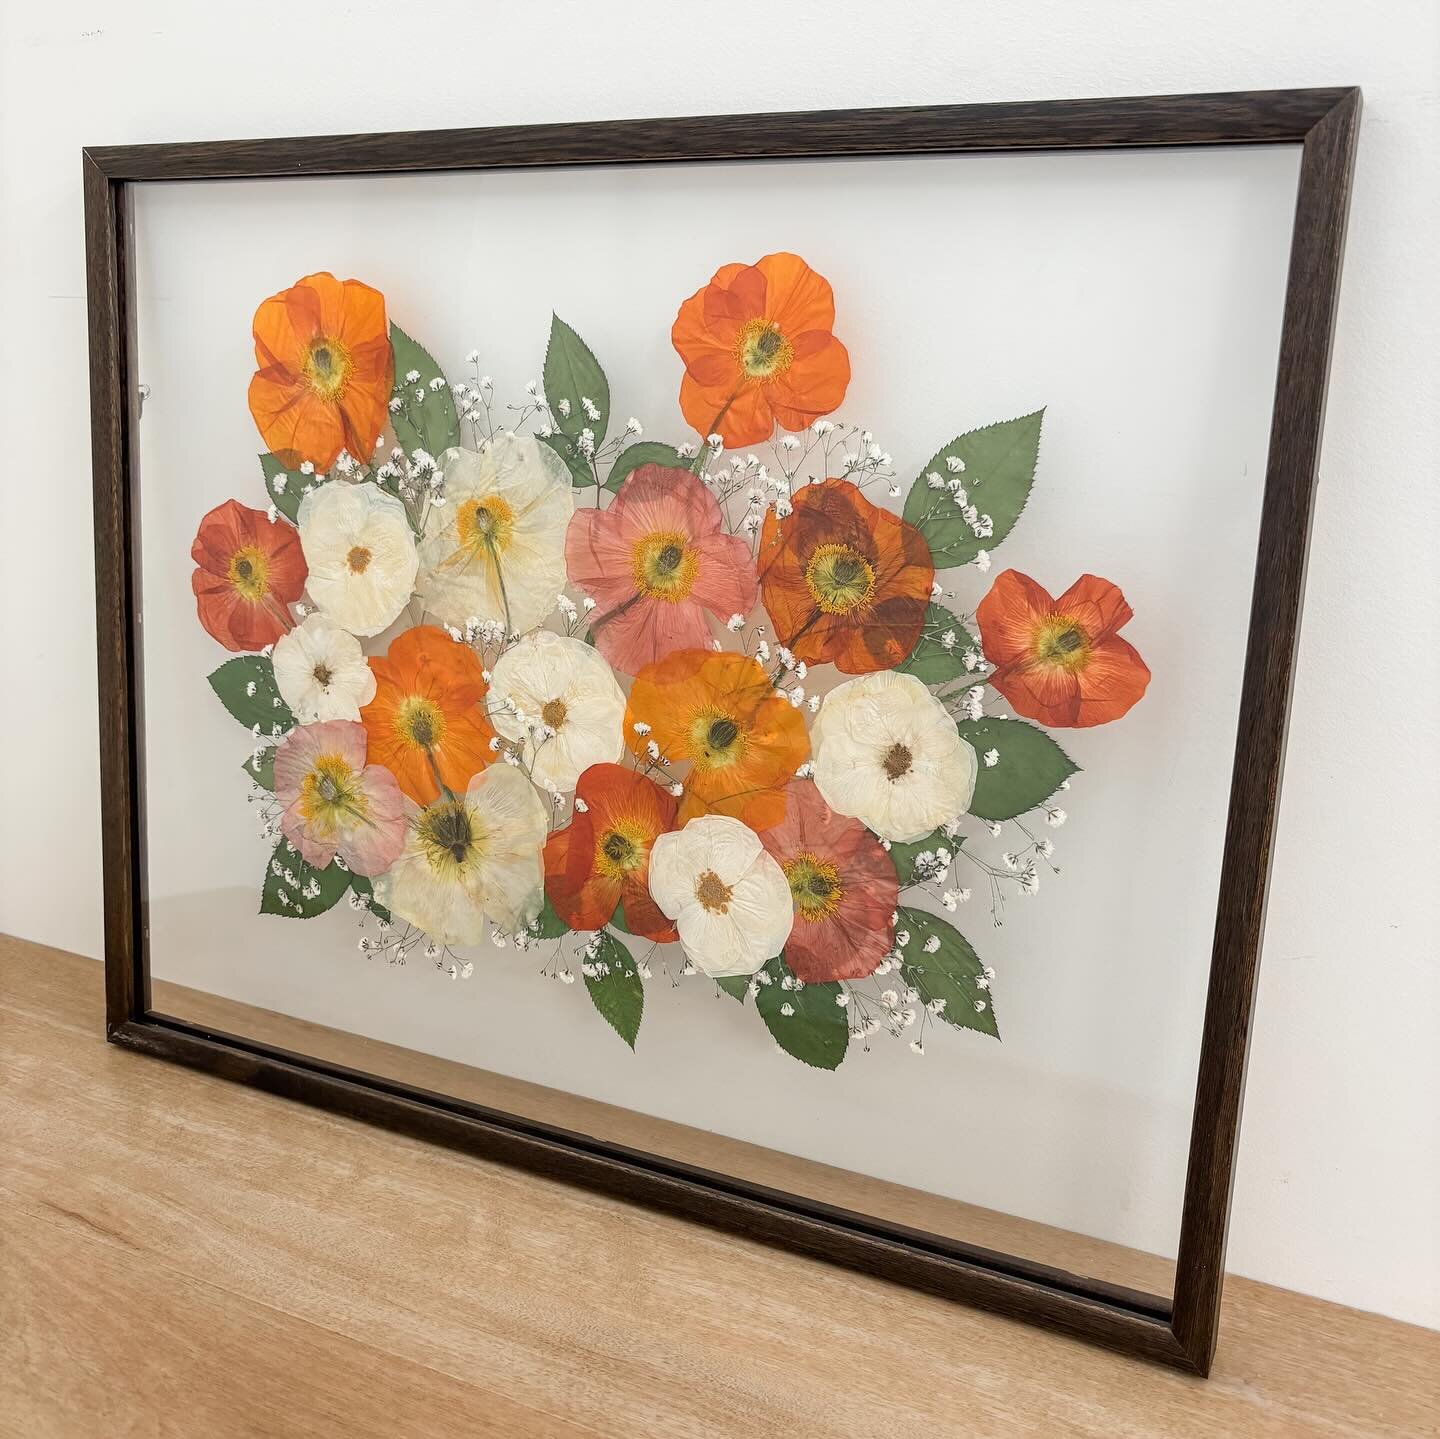 R E C R E A T I O N 

These beautiful frames were created as a surprise for this man&rsquo;s wife where we recreated their wedding flowers to create forever pieces to enjoy forever 🧡

Thank you so much @bloomsbytheworkroom for supplying the beautifu